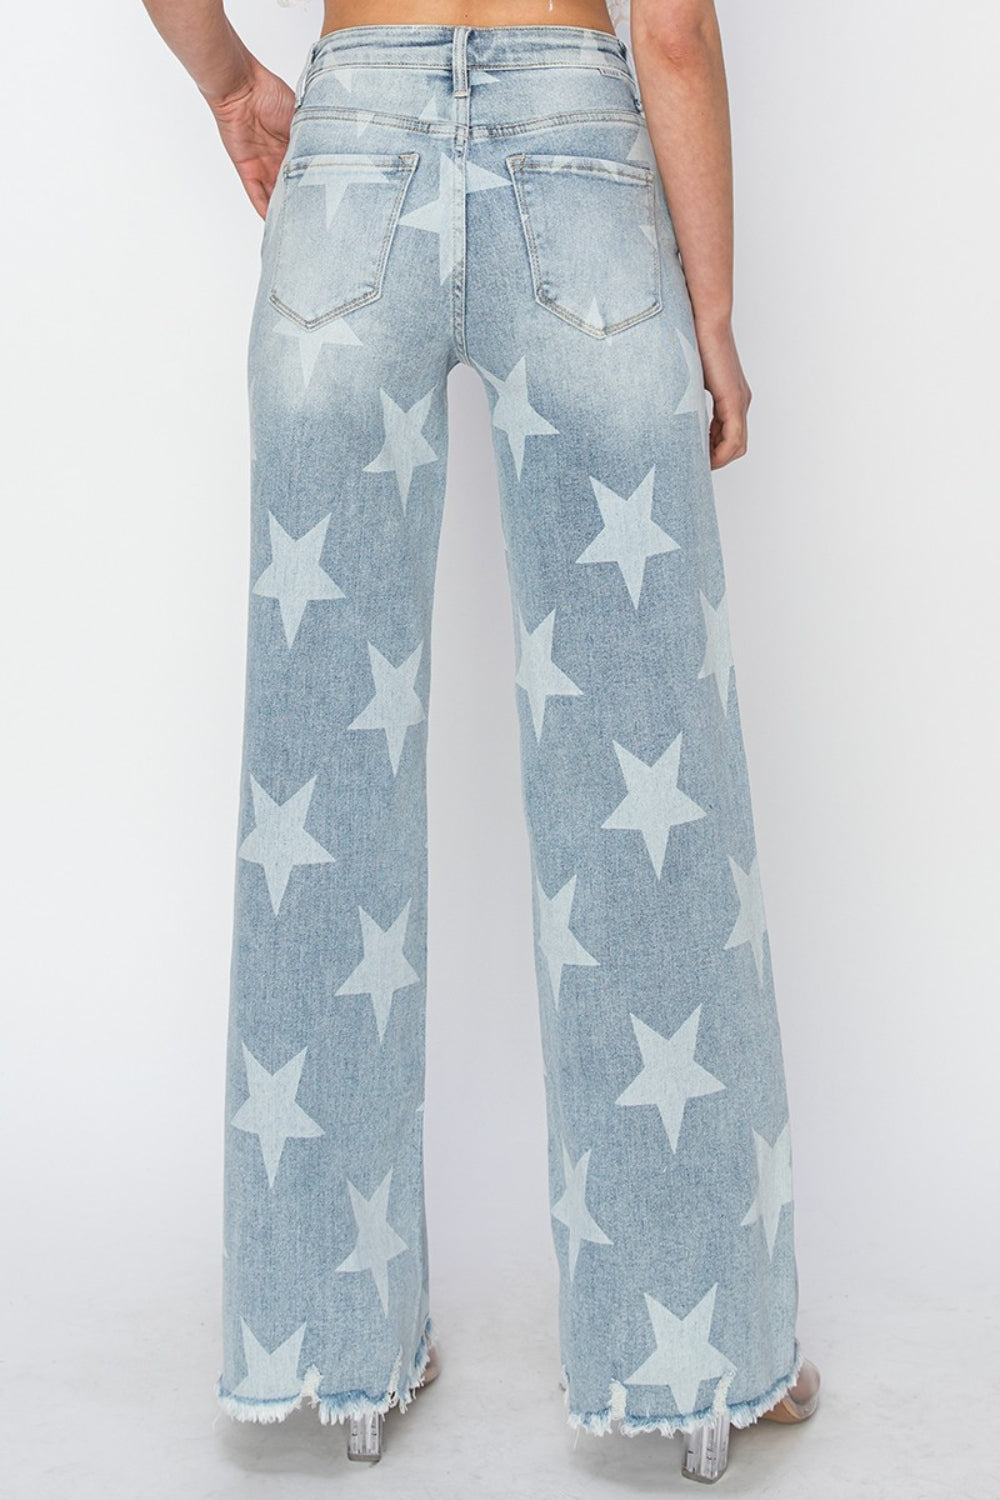 RISEN Full Size Raw Hem Star Wide Leg Jeans-Denim-Inspired by Justeen-Women's Clothing Boutique in Chicago, Illinois